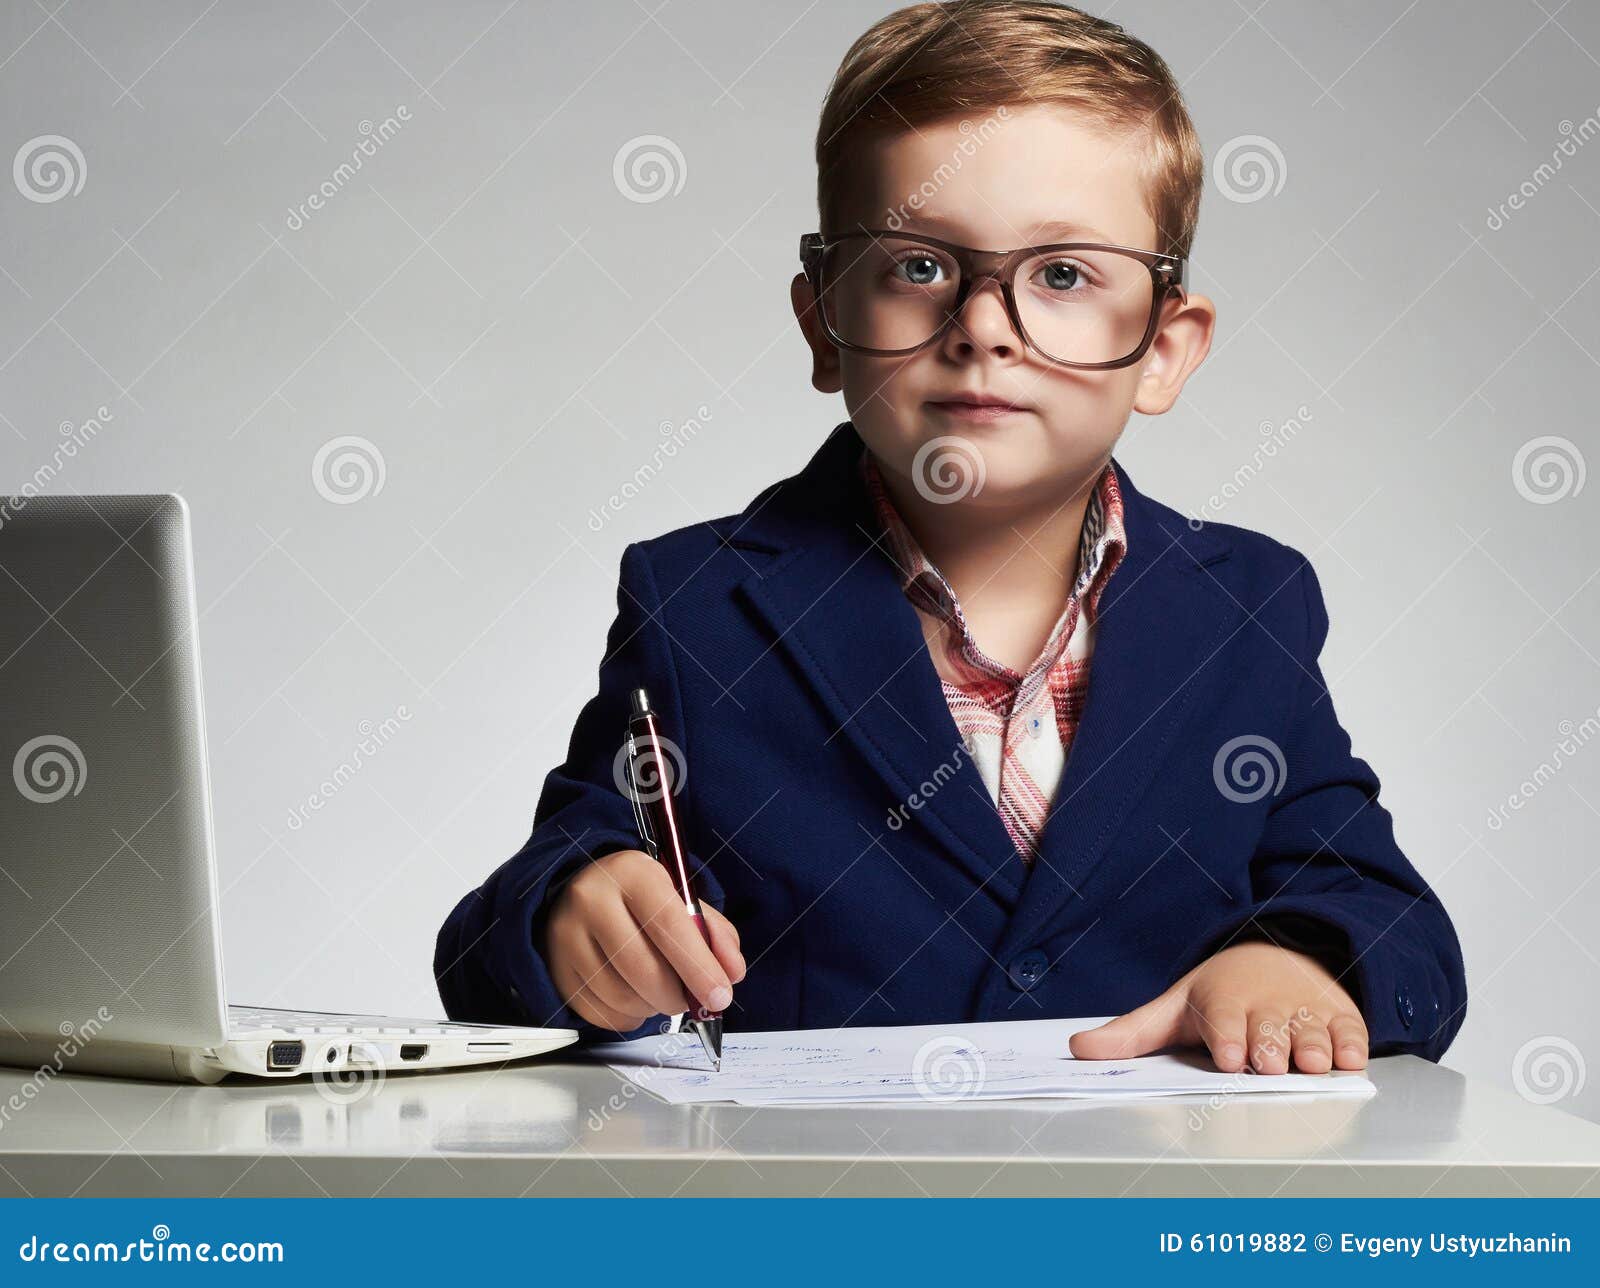 child young business boy office kid glasses writing pen funny 61019882